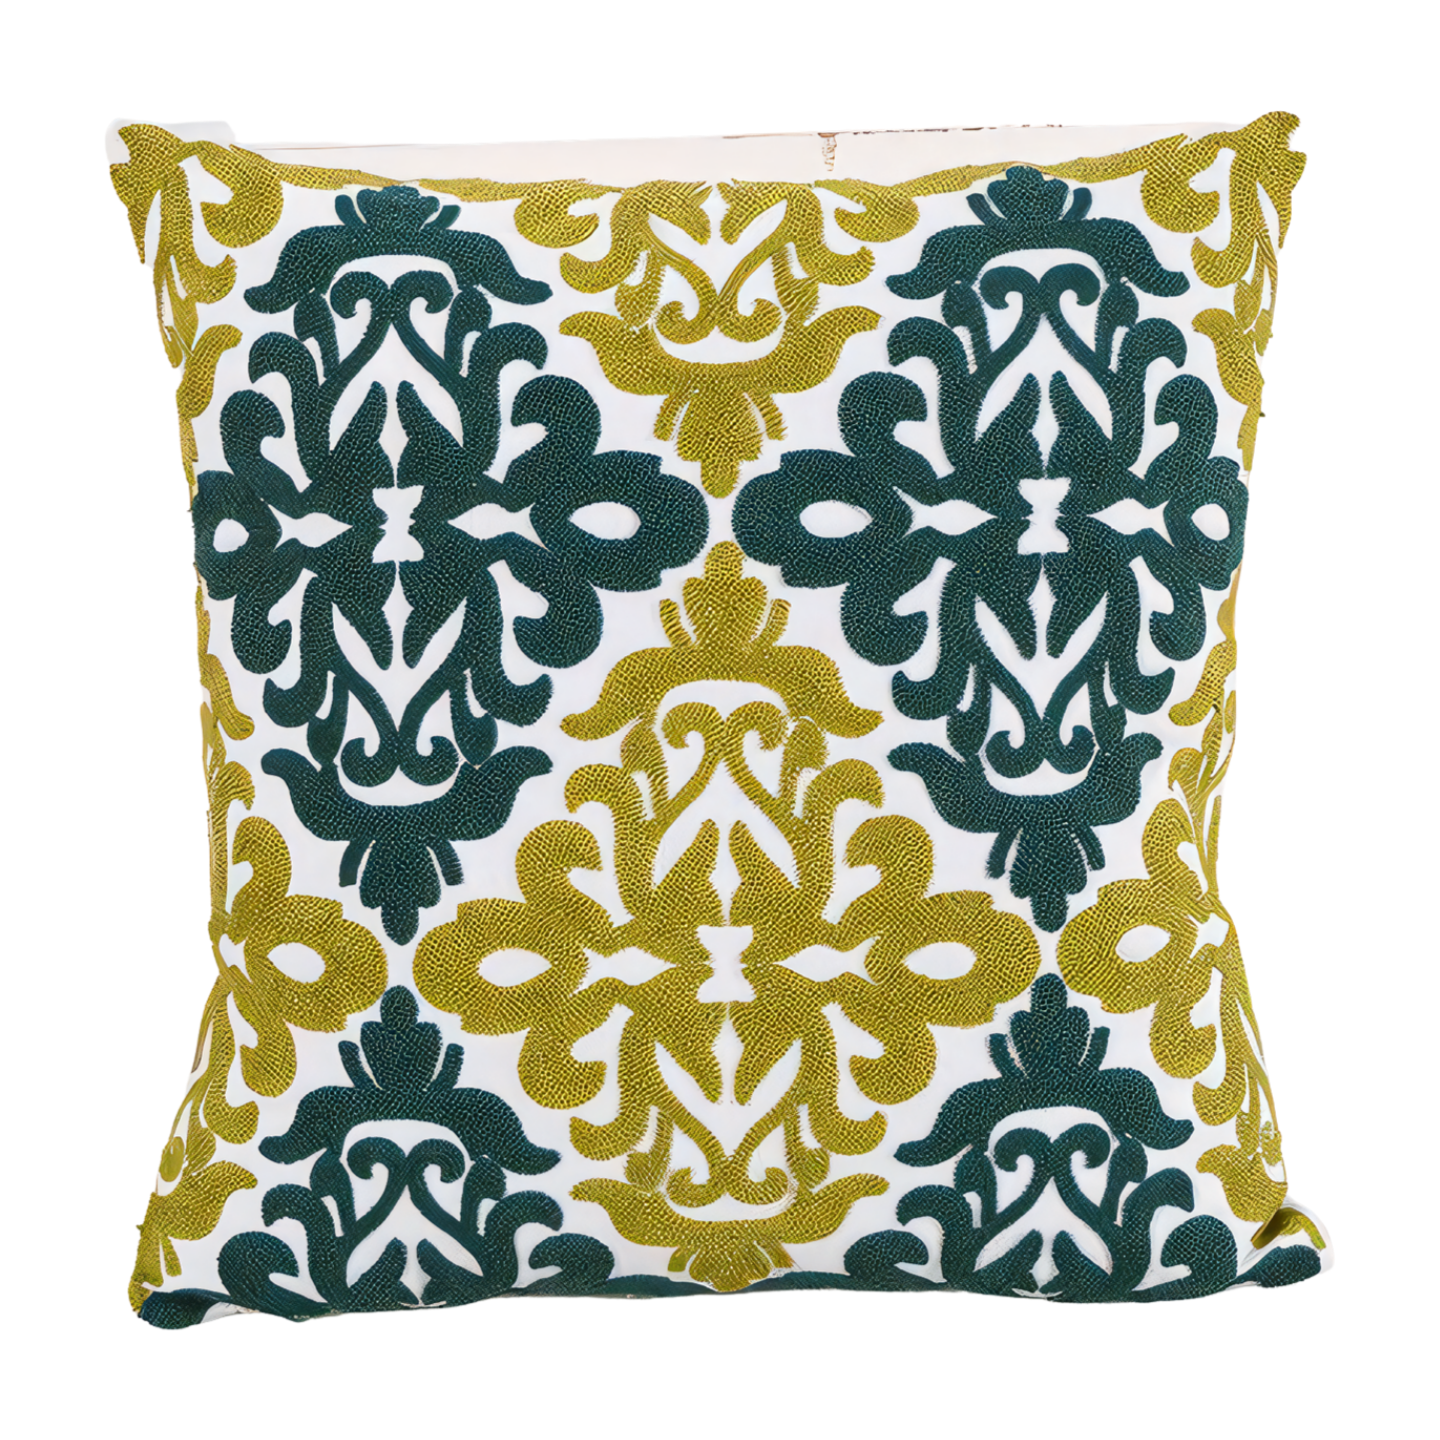 Geneva Woolen Embroidered Throw Pillow Cover